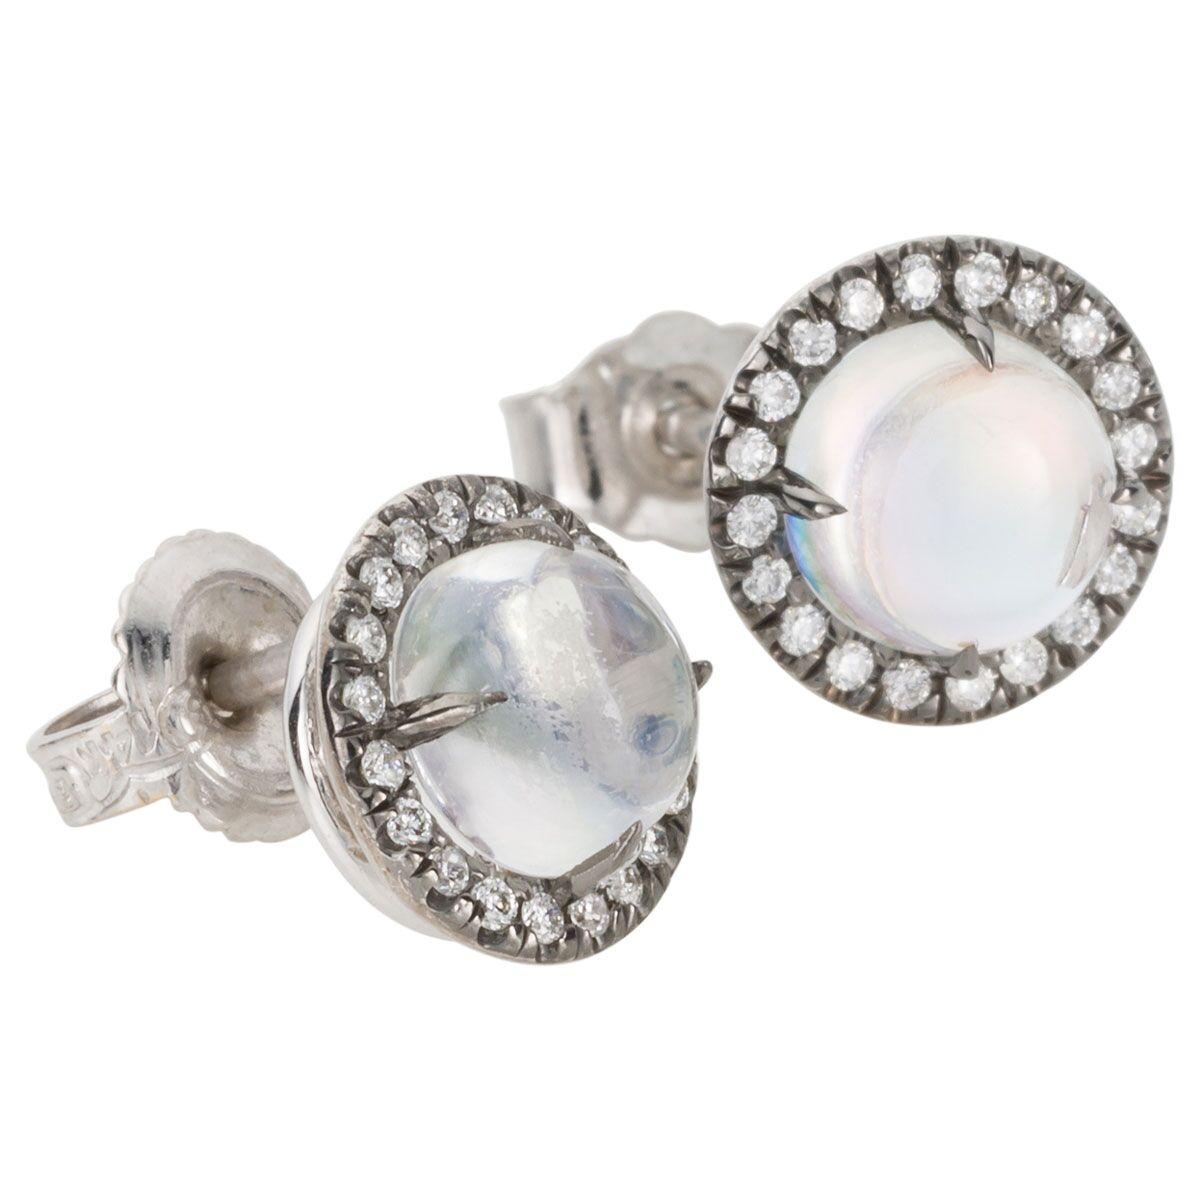 These are so cute, looking for a pair of studs that are great for everyday wear but you want something unique. Look no further than these sweet 18k white gold cabochon moonstone & diamond studs. They feature a beautiful rainbow moonstones that show